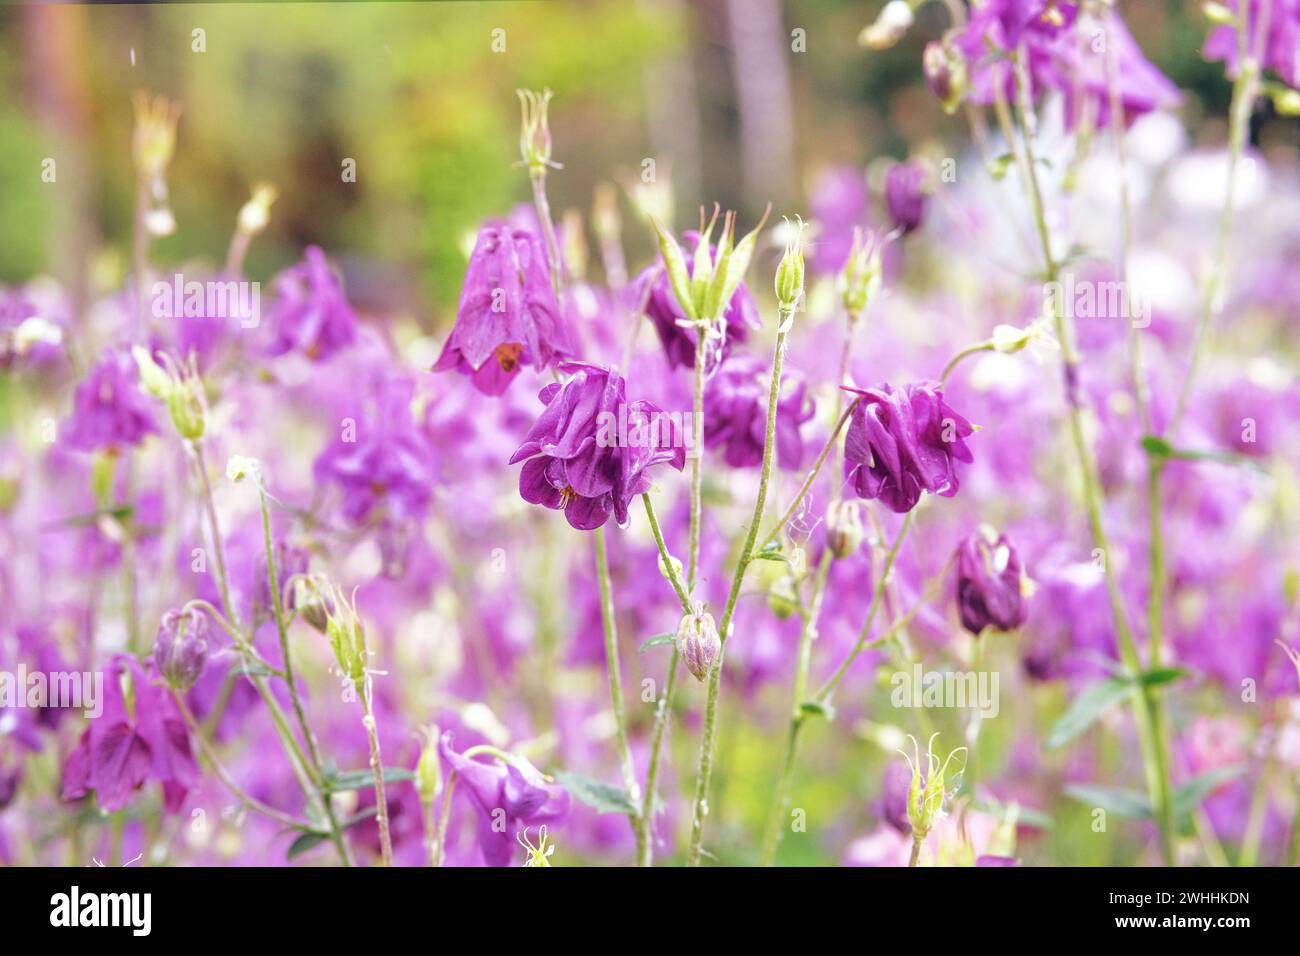 Aquilegia vulgaris flowers blooming with white bright petals. Spring blurred background of nature. Purple color. Low mountain range. Stock Photo